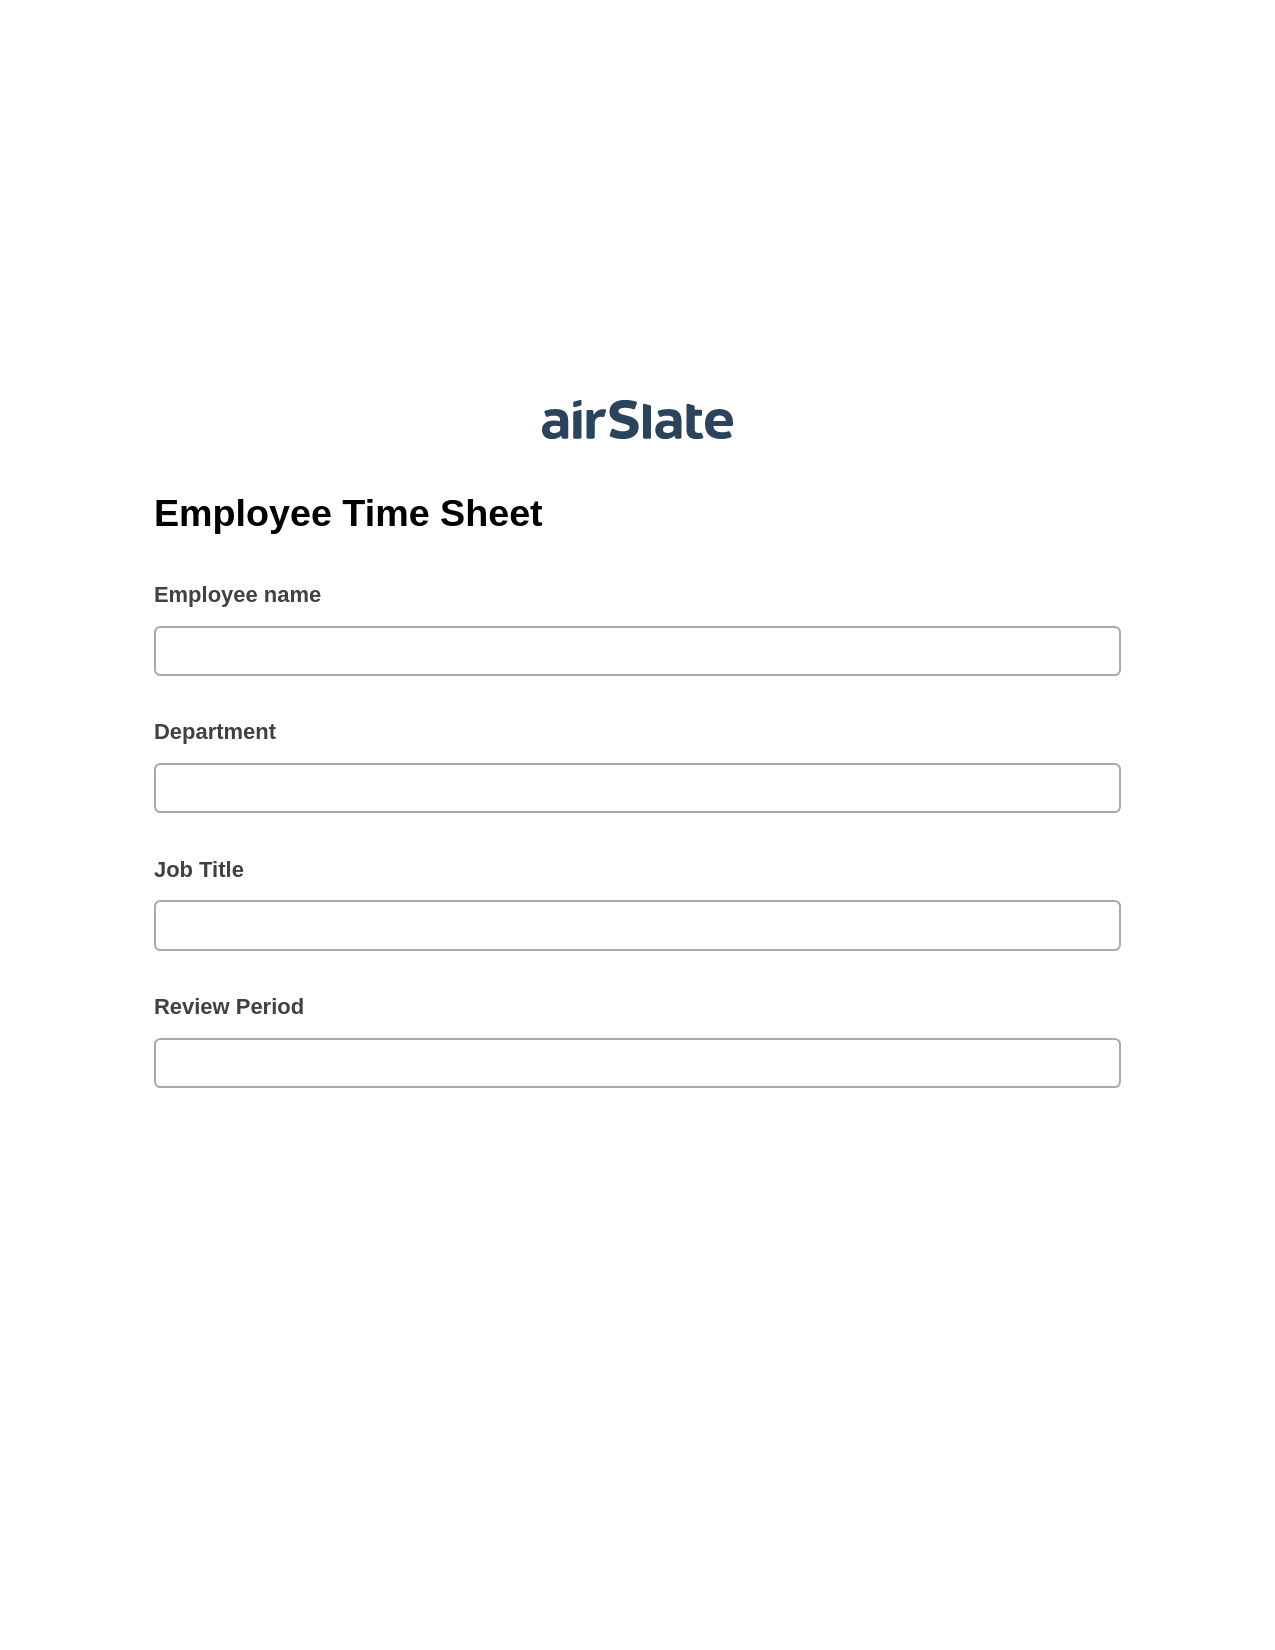 Employee Time Sheet Pre-fill Dropdowns from Airtable, Jira Bot, Webhook Postfinish Bot